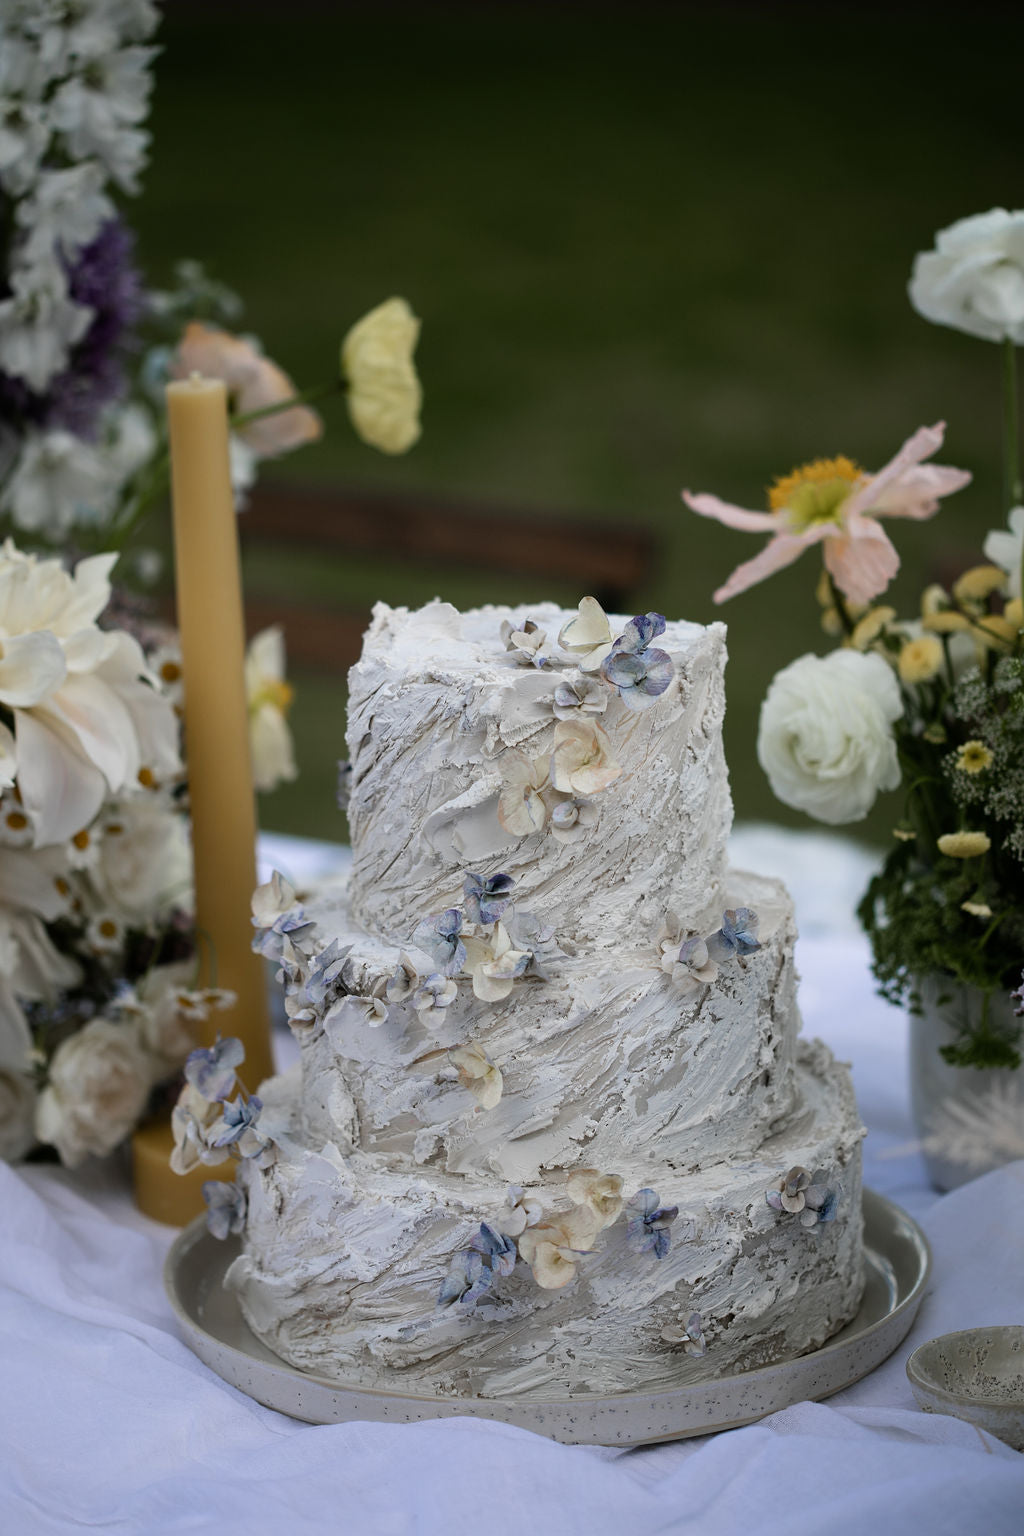 Ceramic cake plate for hire | For Love & Living Gold Coast Wedding & Events